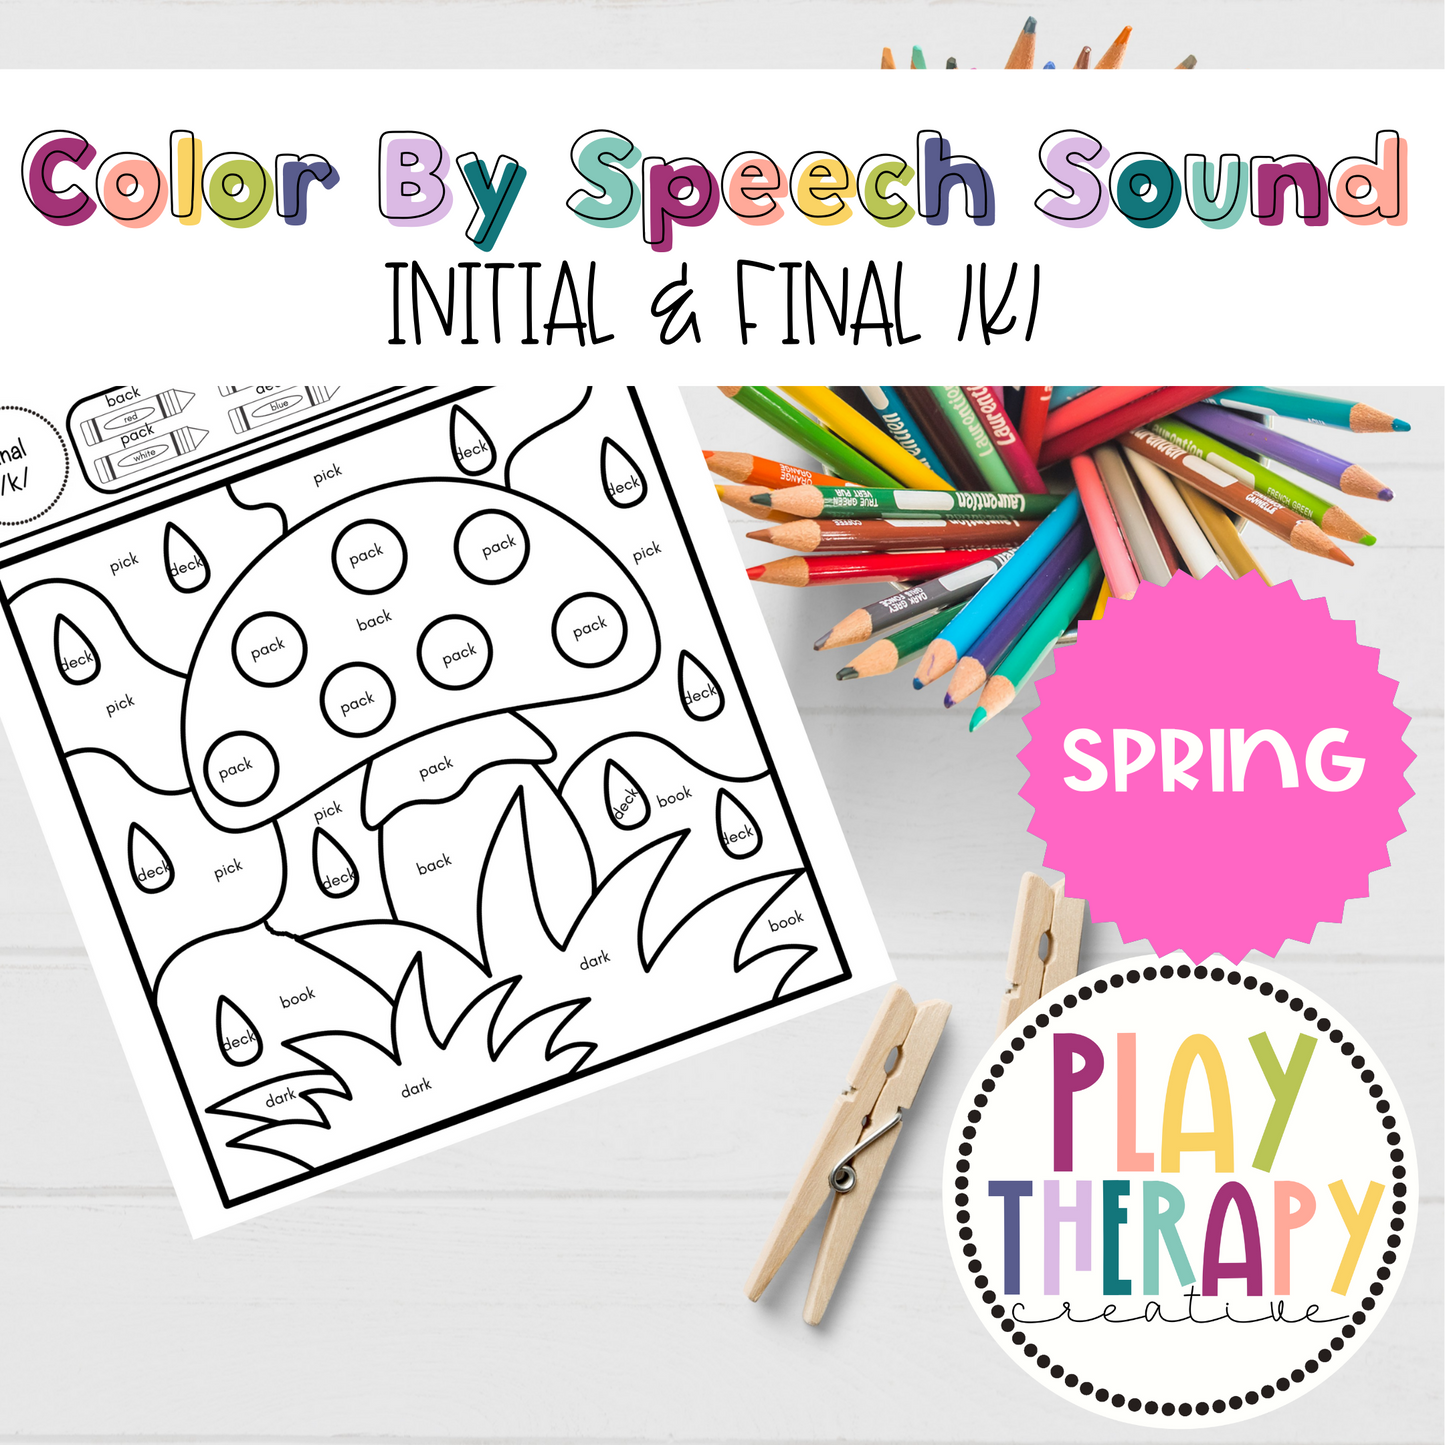 /k/ Sound Spring Themed Color-by-Speech-Sounds for Speech Therapy